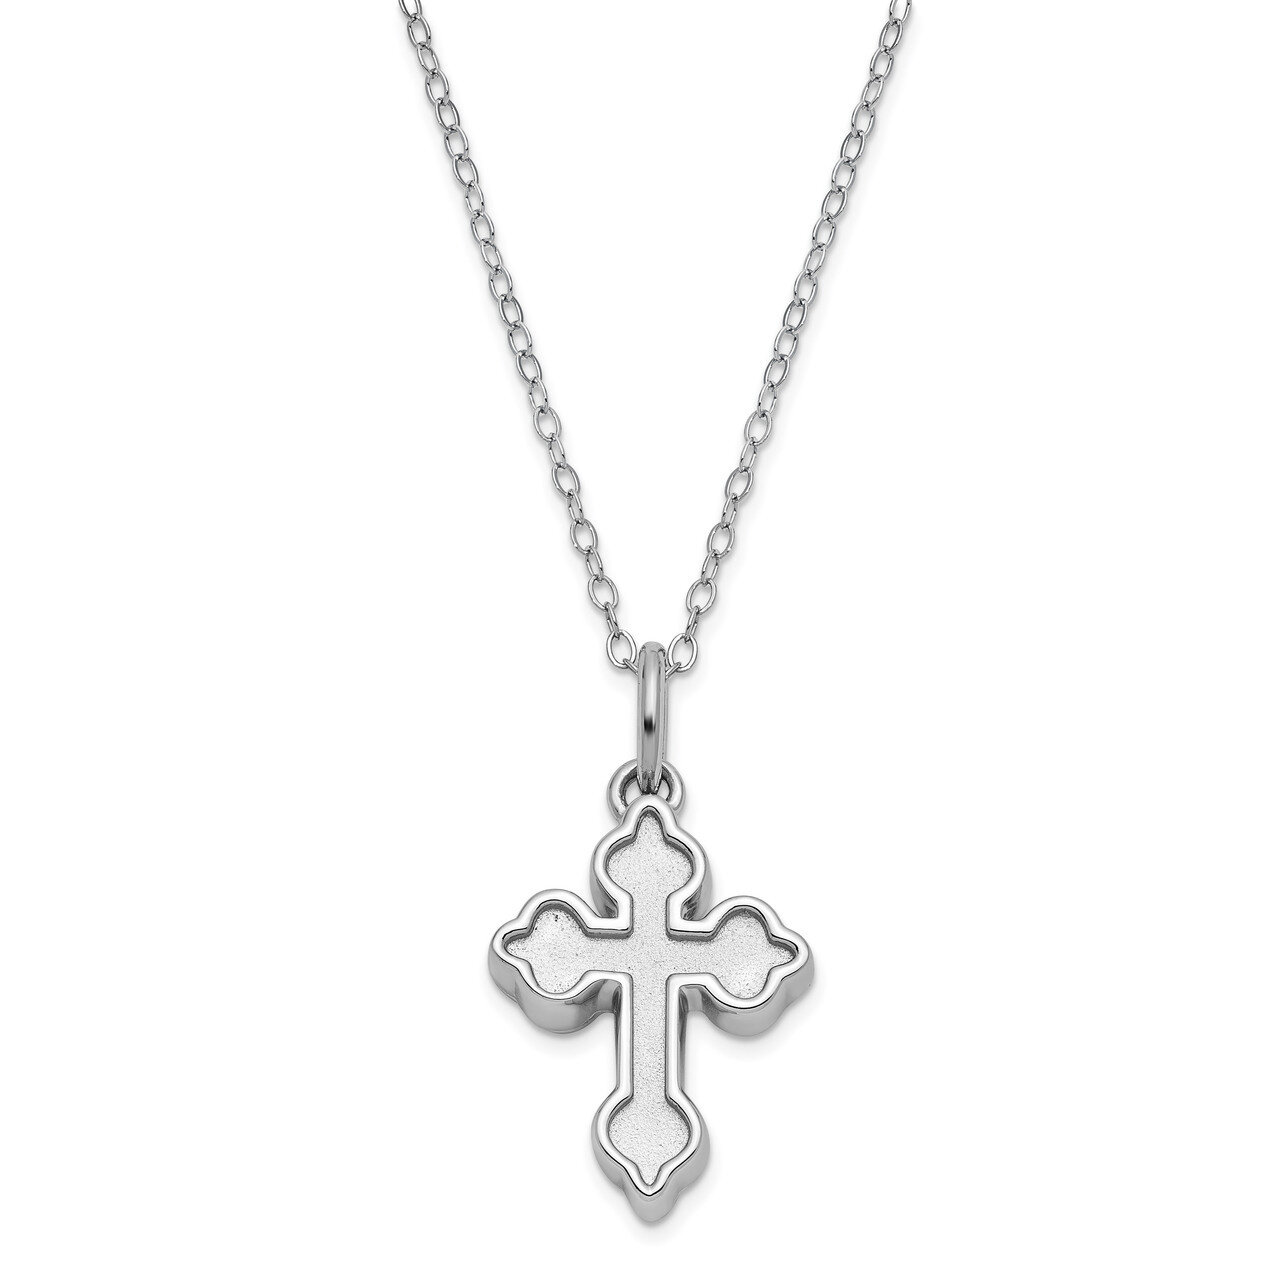 Matted Cross Ash Holder 18 Inch Necklace Sterling Silver QSX700